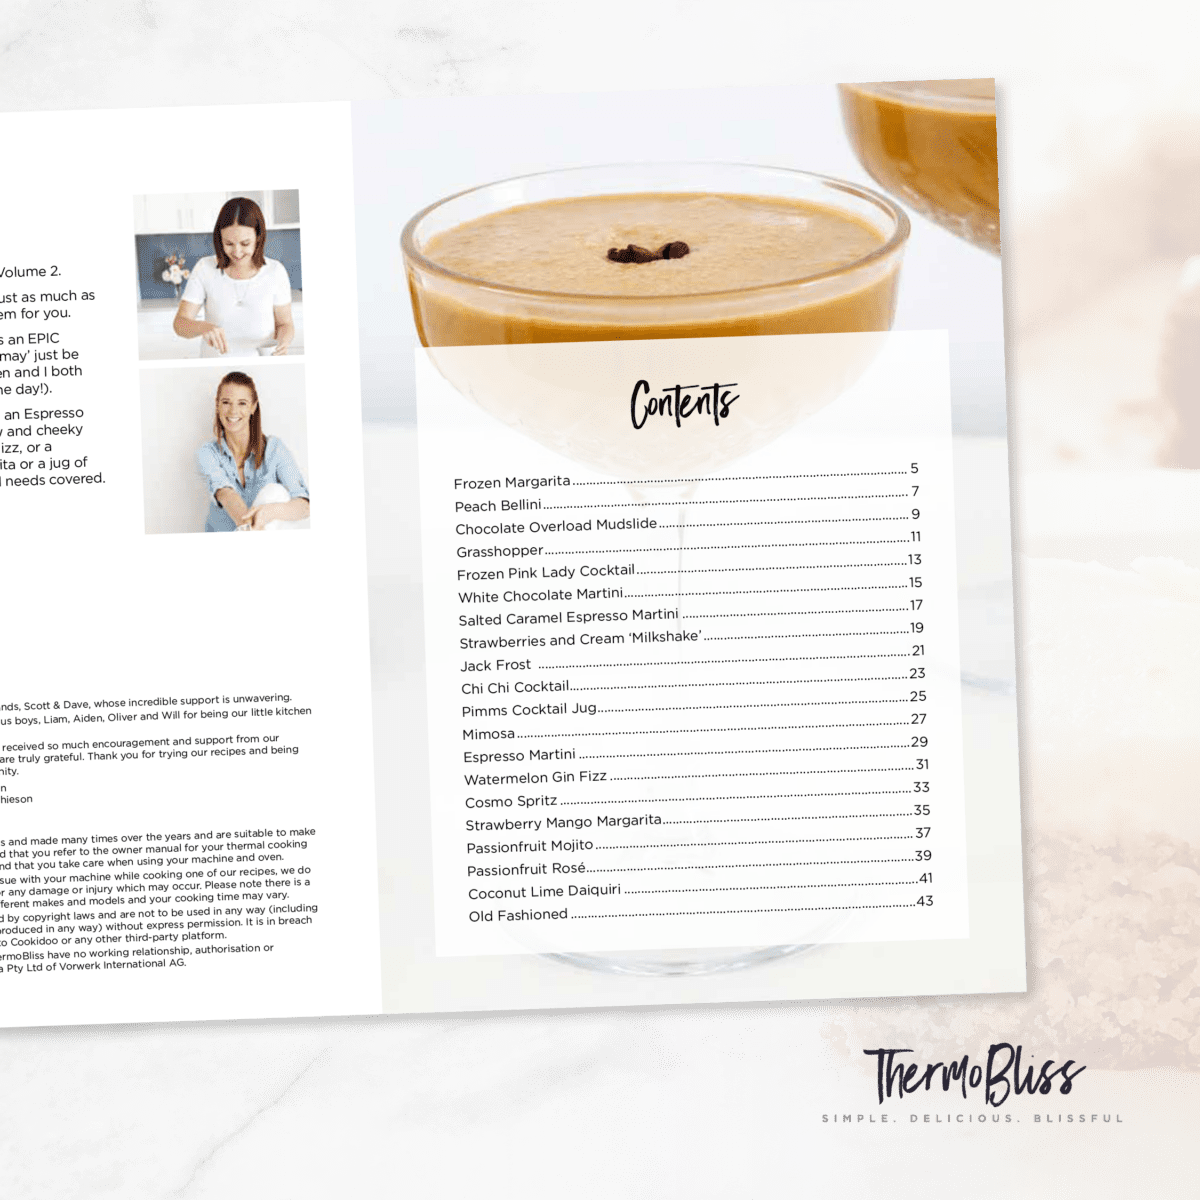 Image of the contents page from Thermomix Cocktails Cookbook Volume 2.